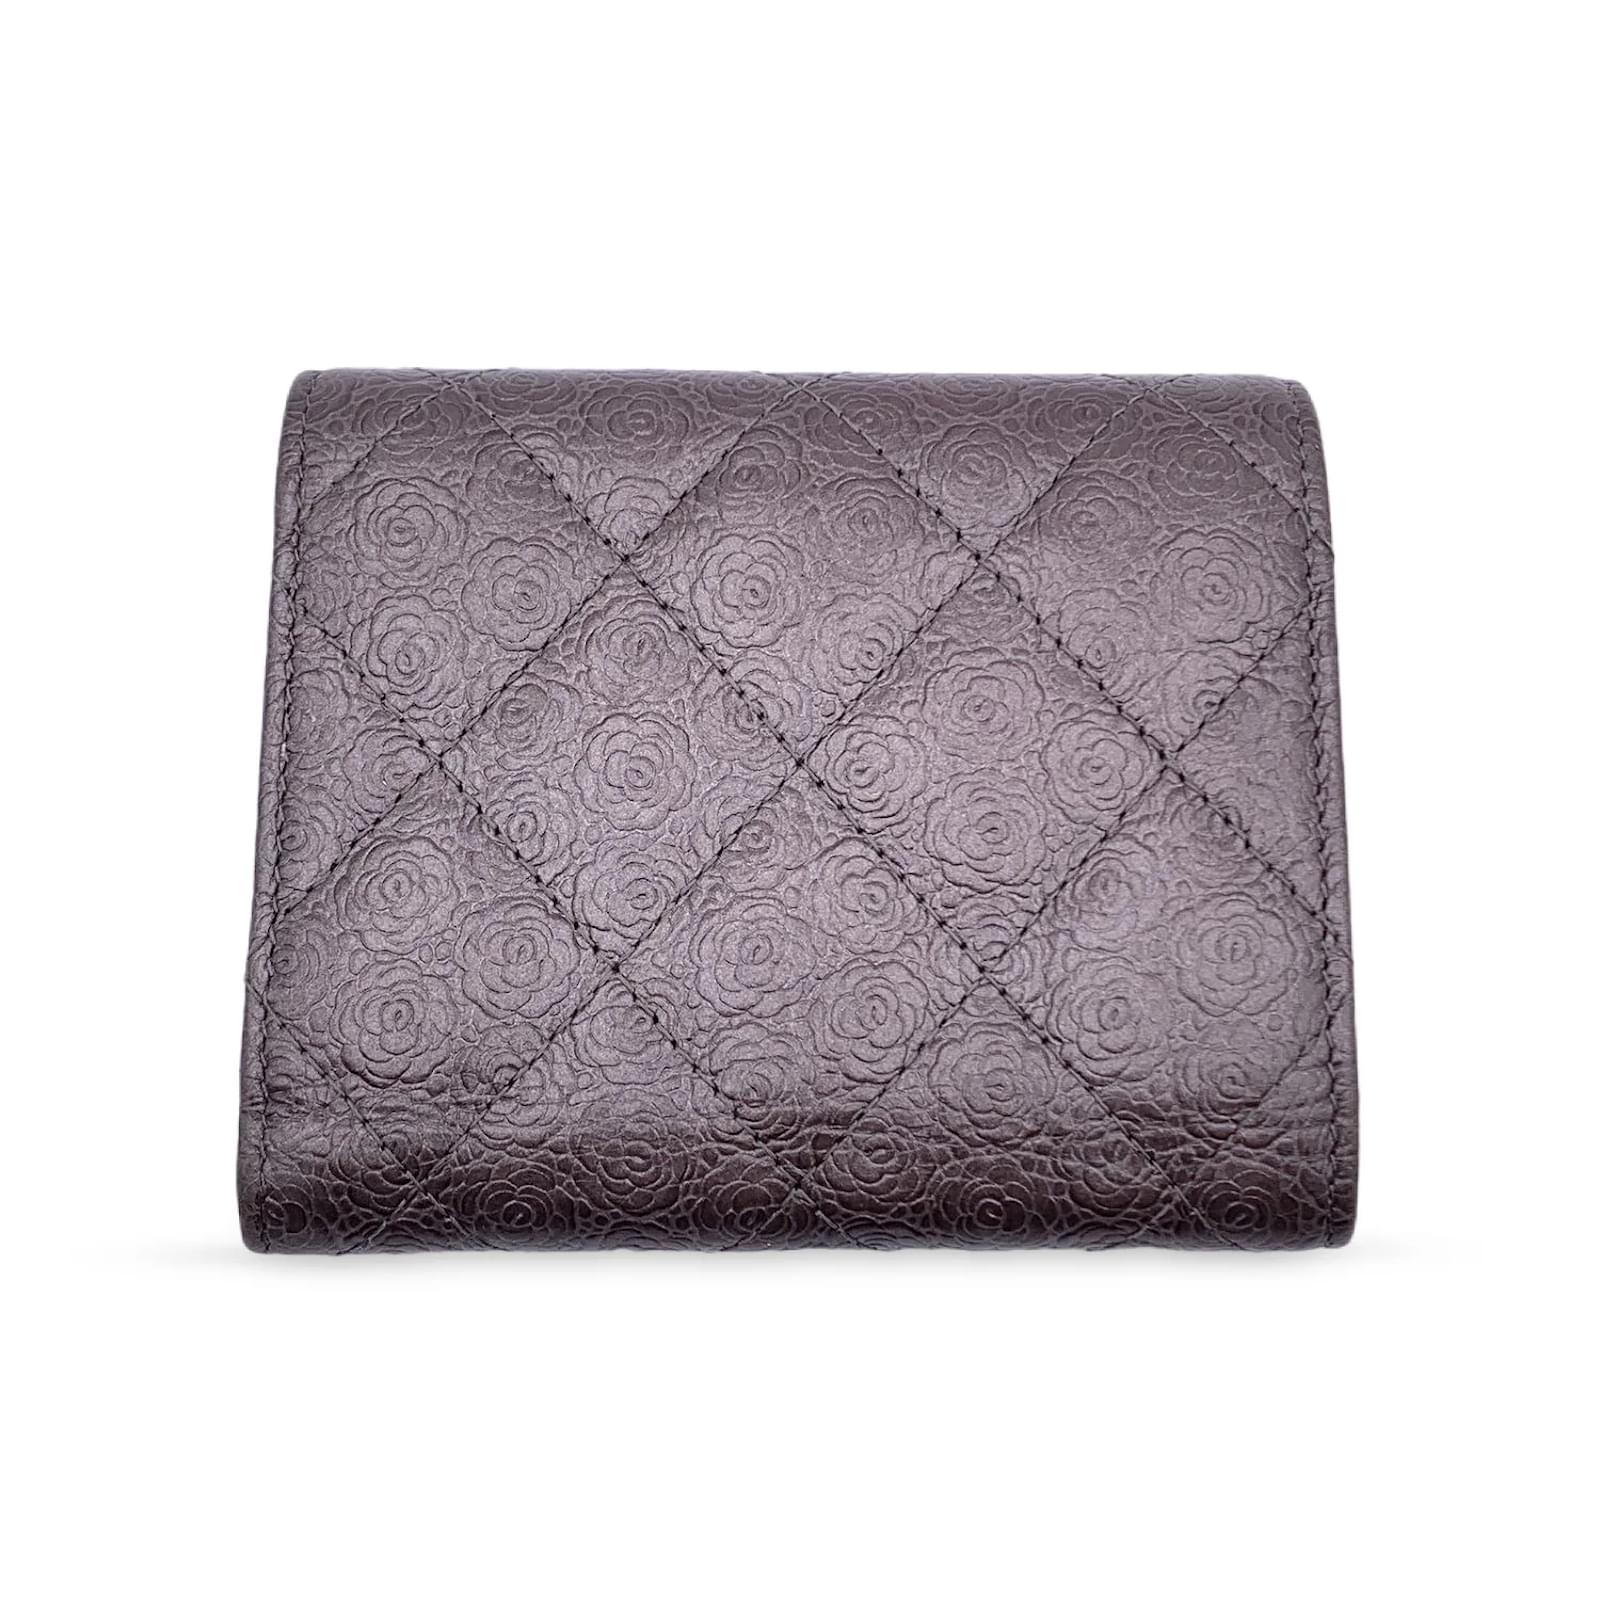 Chanel Grey Quilted Leather Camellia Pattern Compact Tri Fold